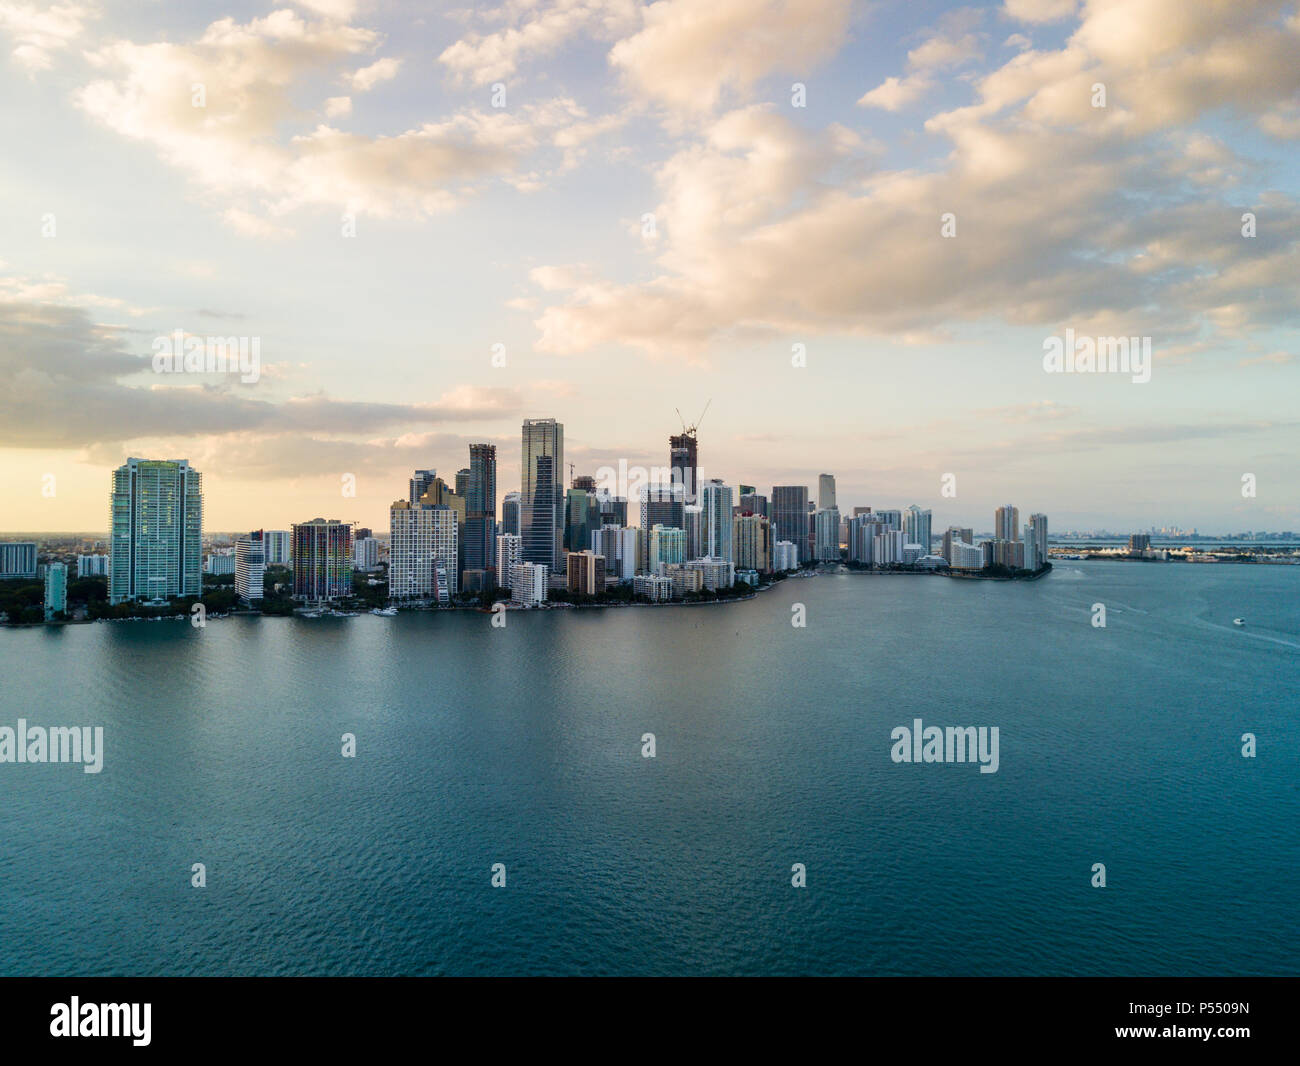 MIAMI, FLORIDA - CIRCA APRIL 2017: Aerial View of Biscayne Bay and Brickell from Key Biscayne in Miami Stock Photo